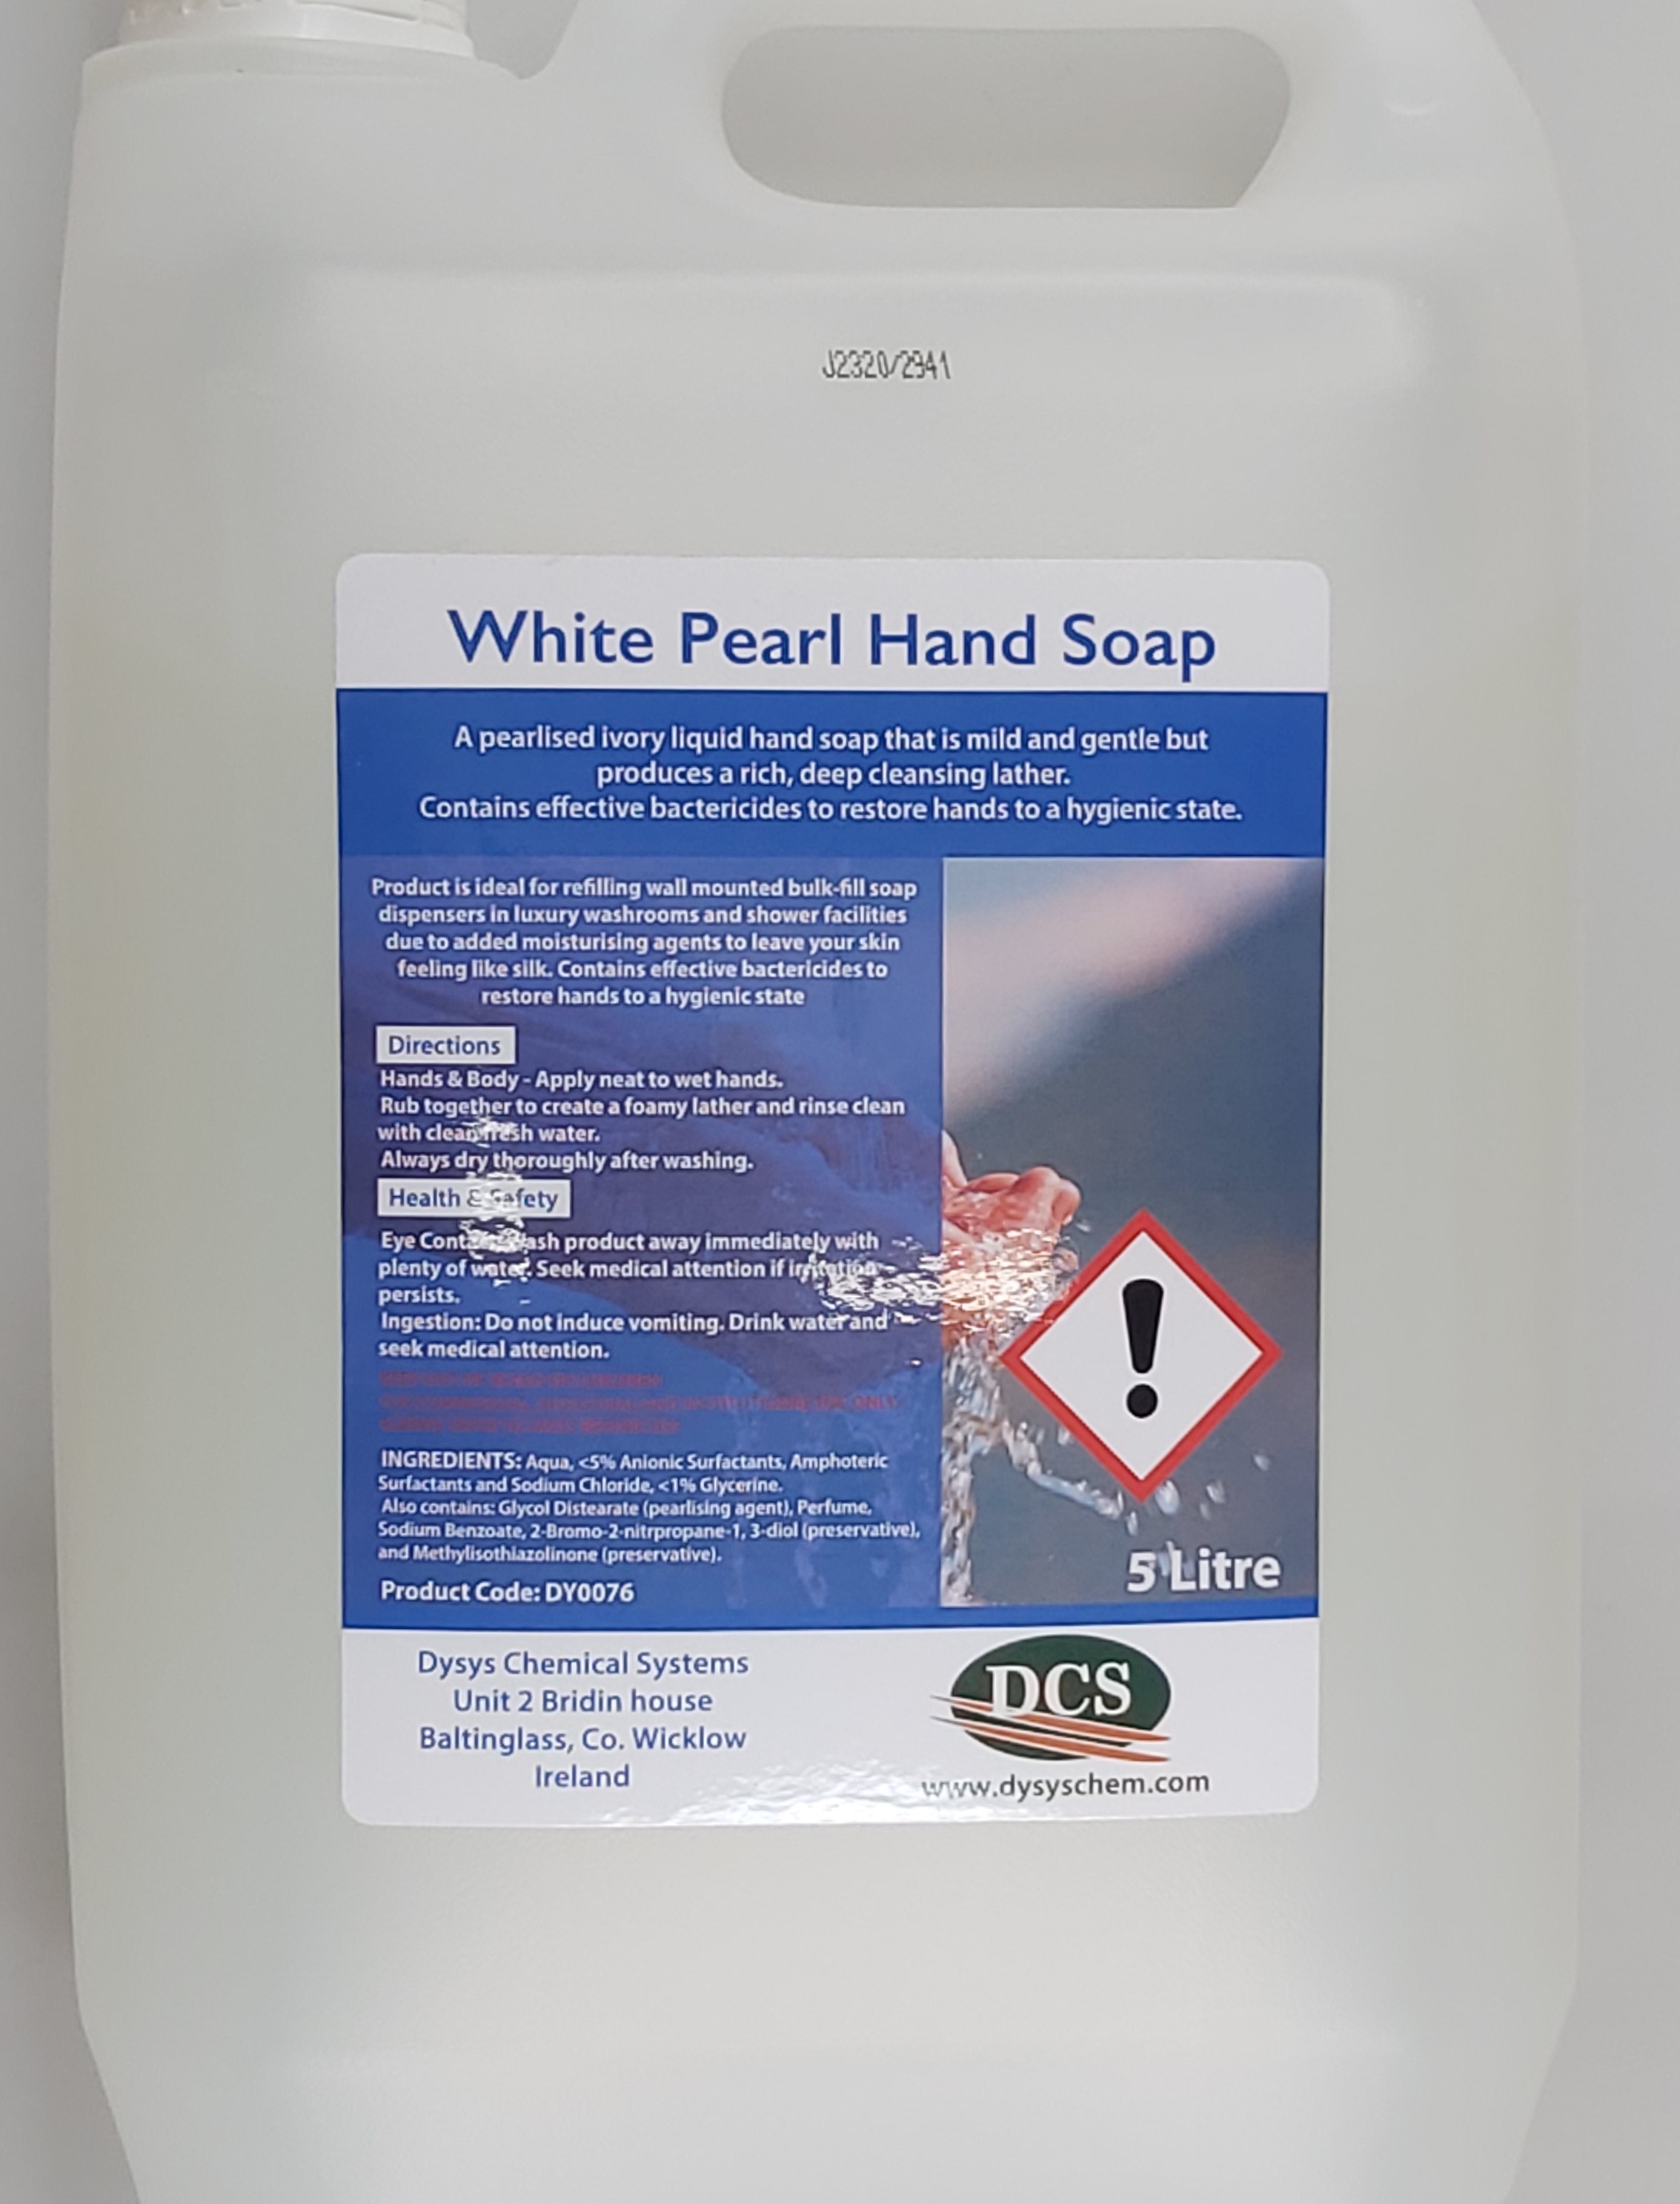 Hand Soap Luxury Antibacterial 5 Litre White Pearl